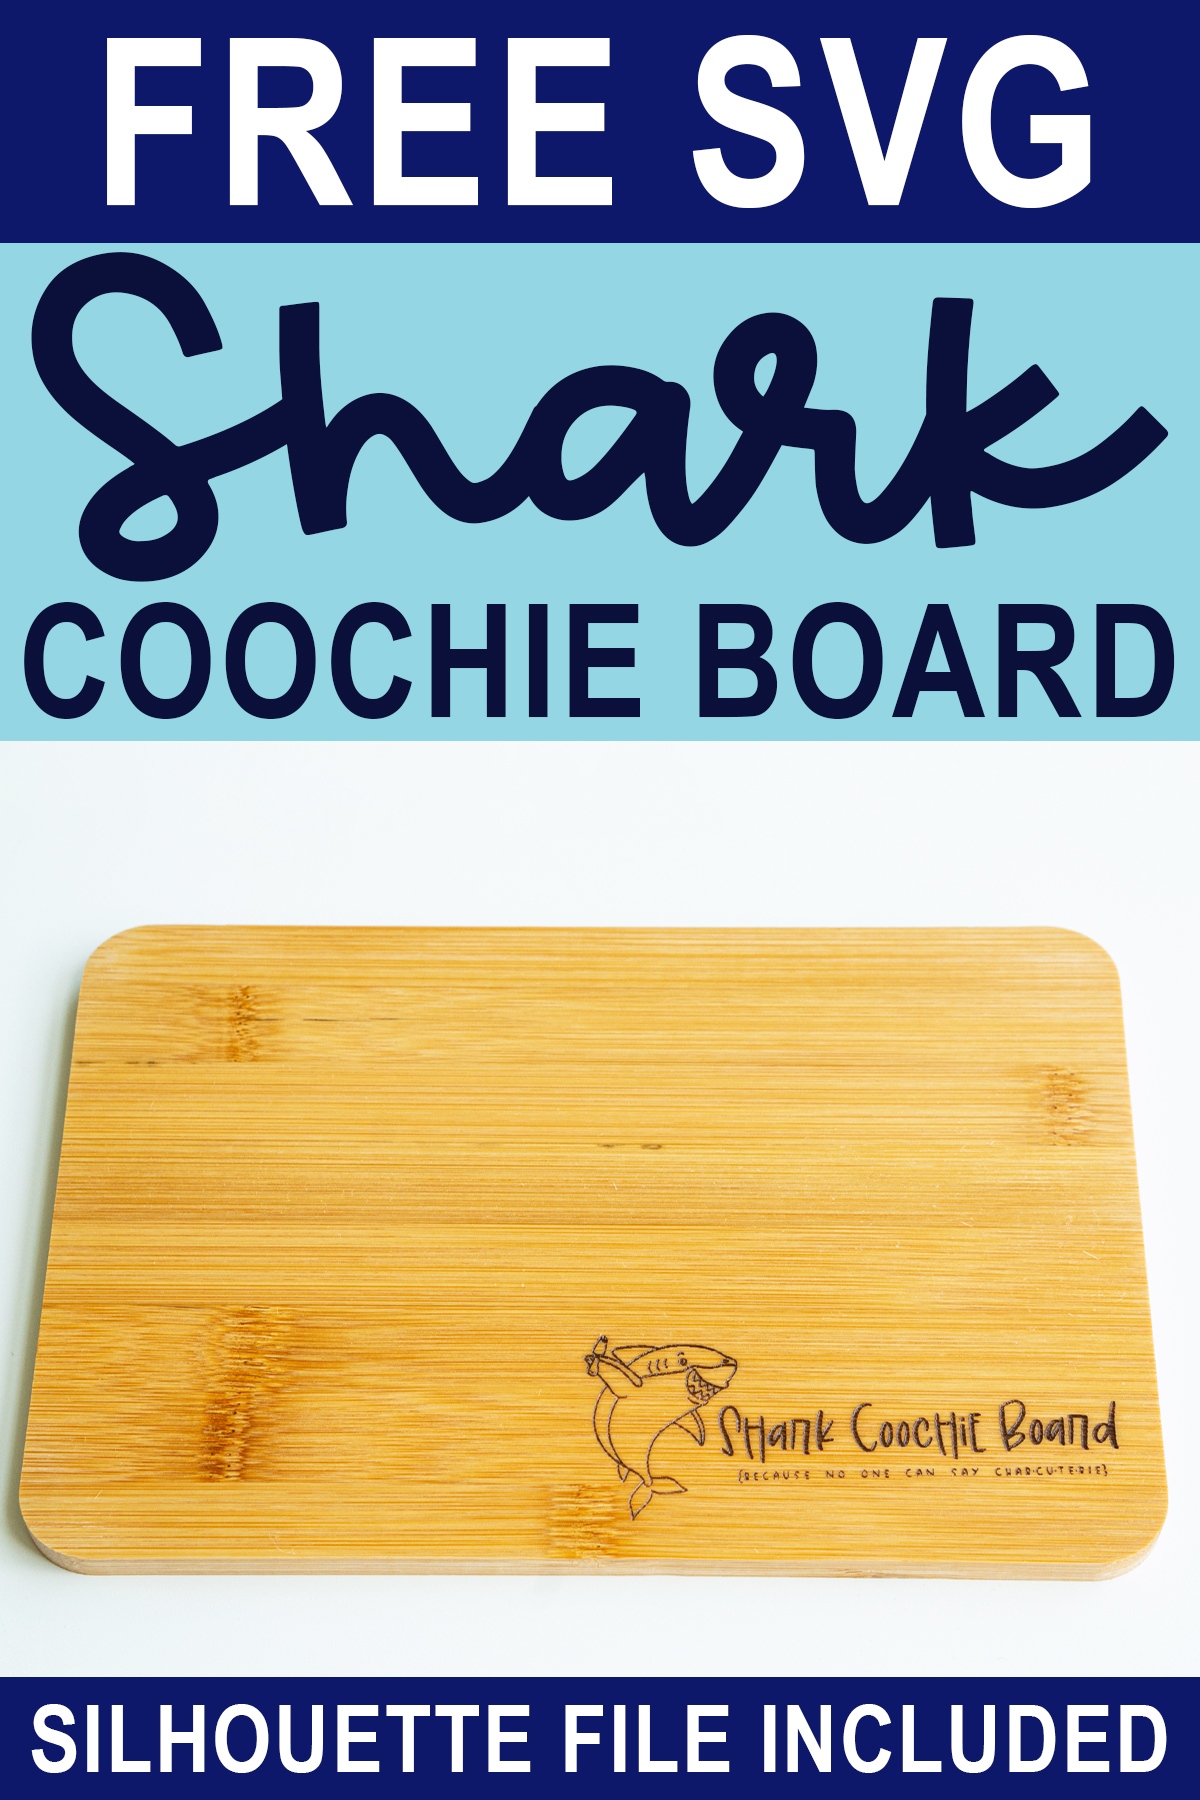 At the top it says free SVG shark coochie board. Below that is an image of a charcuterie board with the SVG engraved. At the bottom it says Silhouette file included.